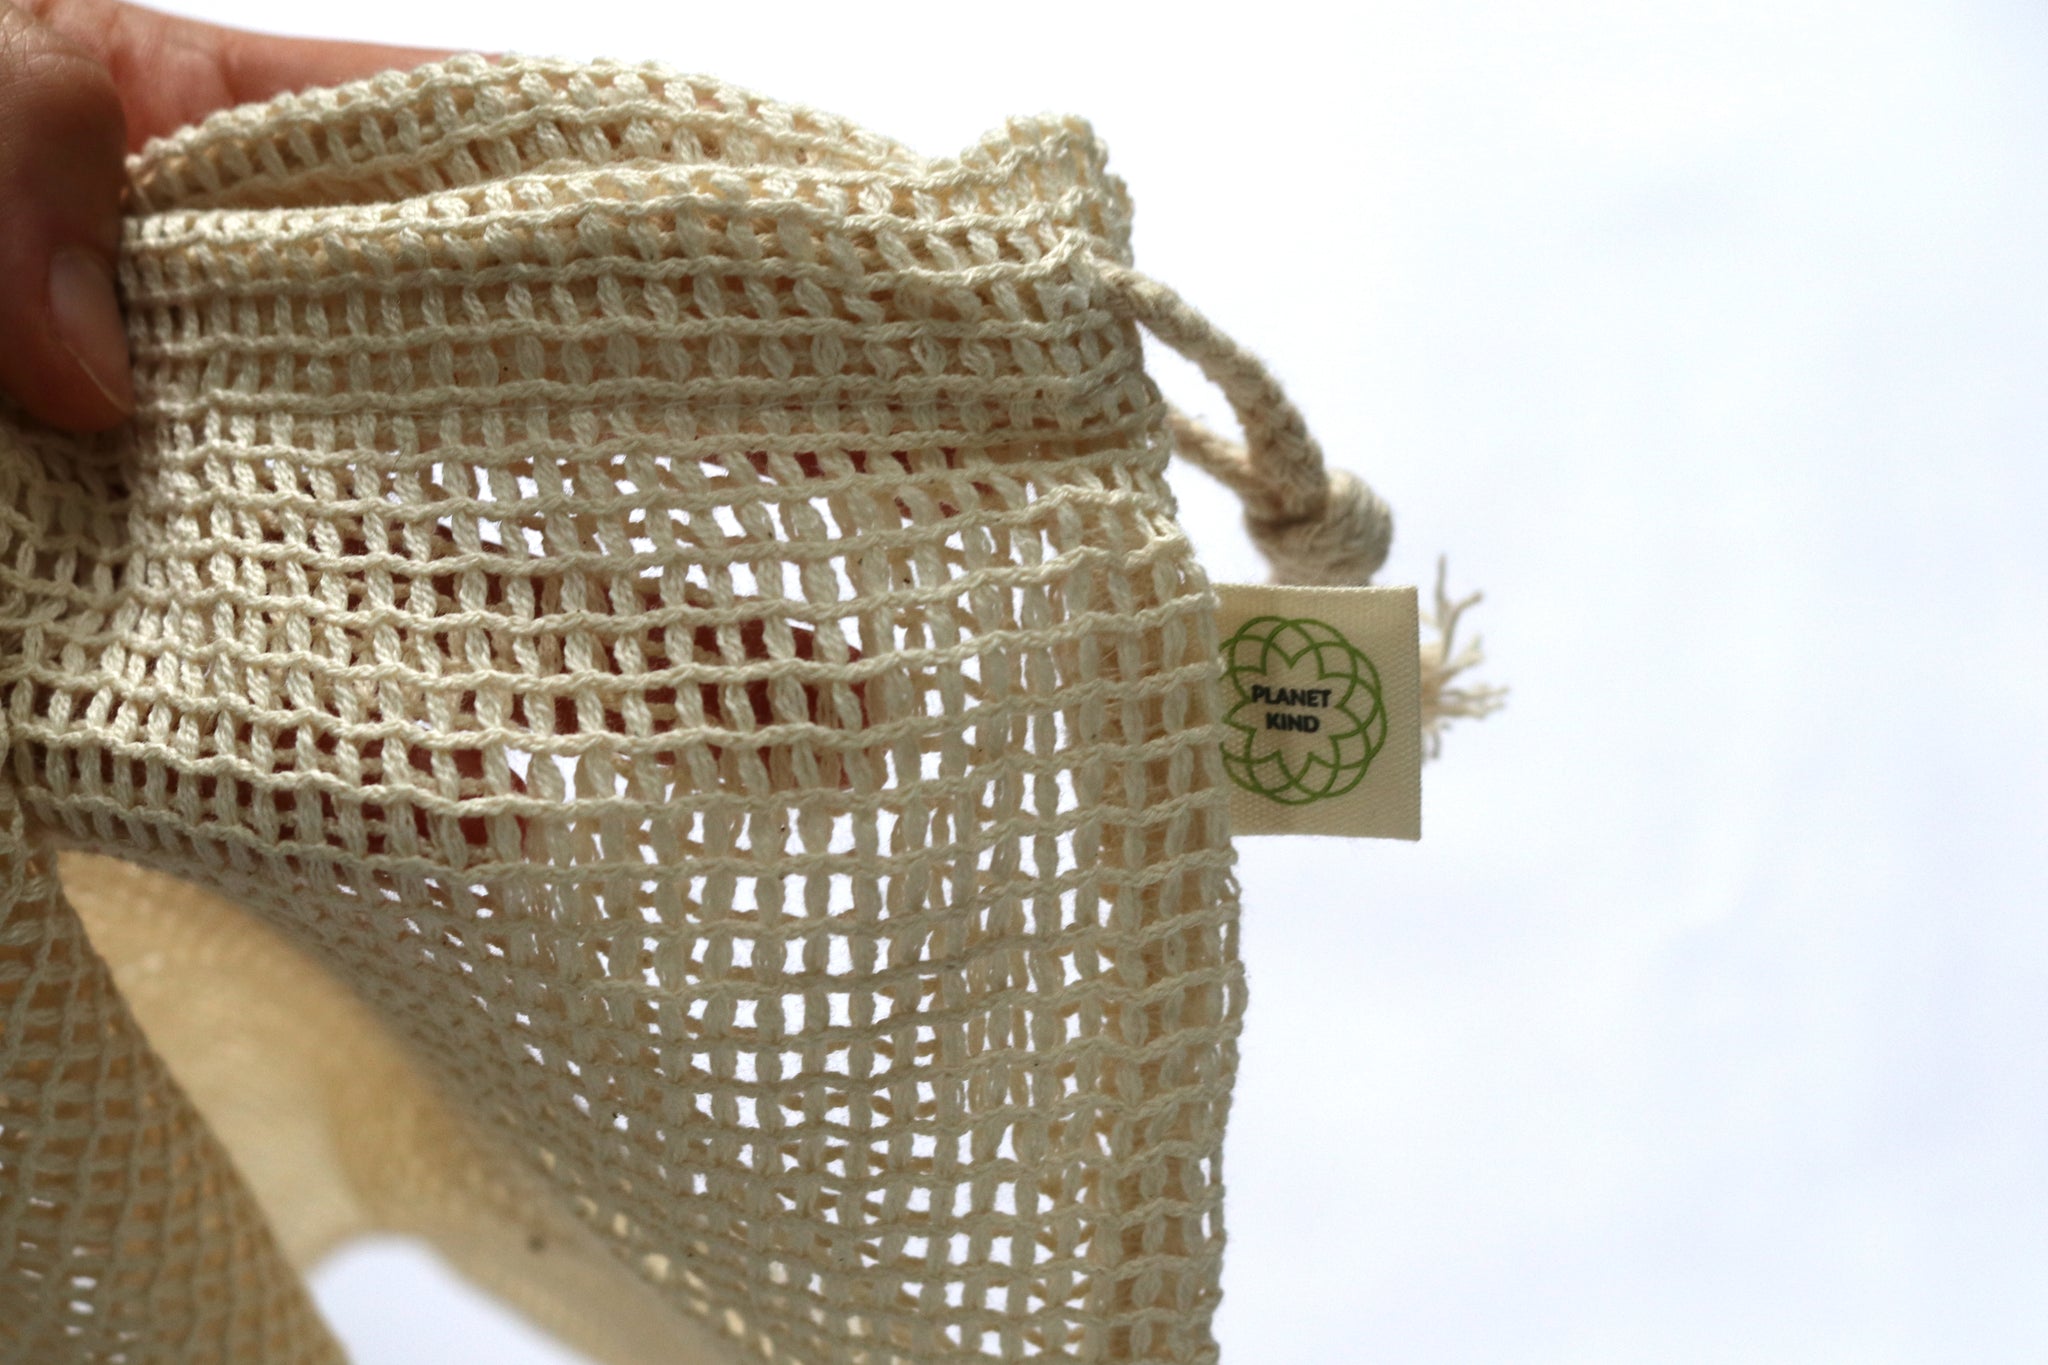 Organic Cotton Mesh Bags – Earth Images